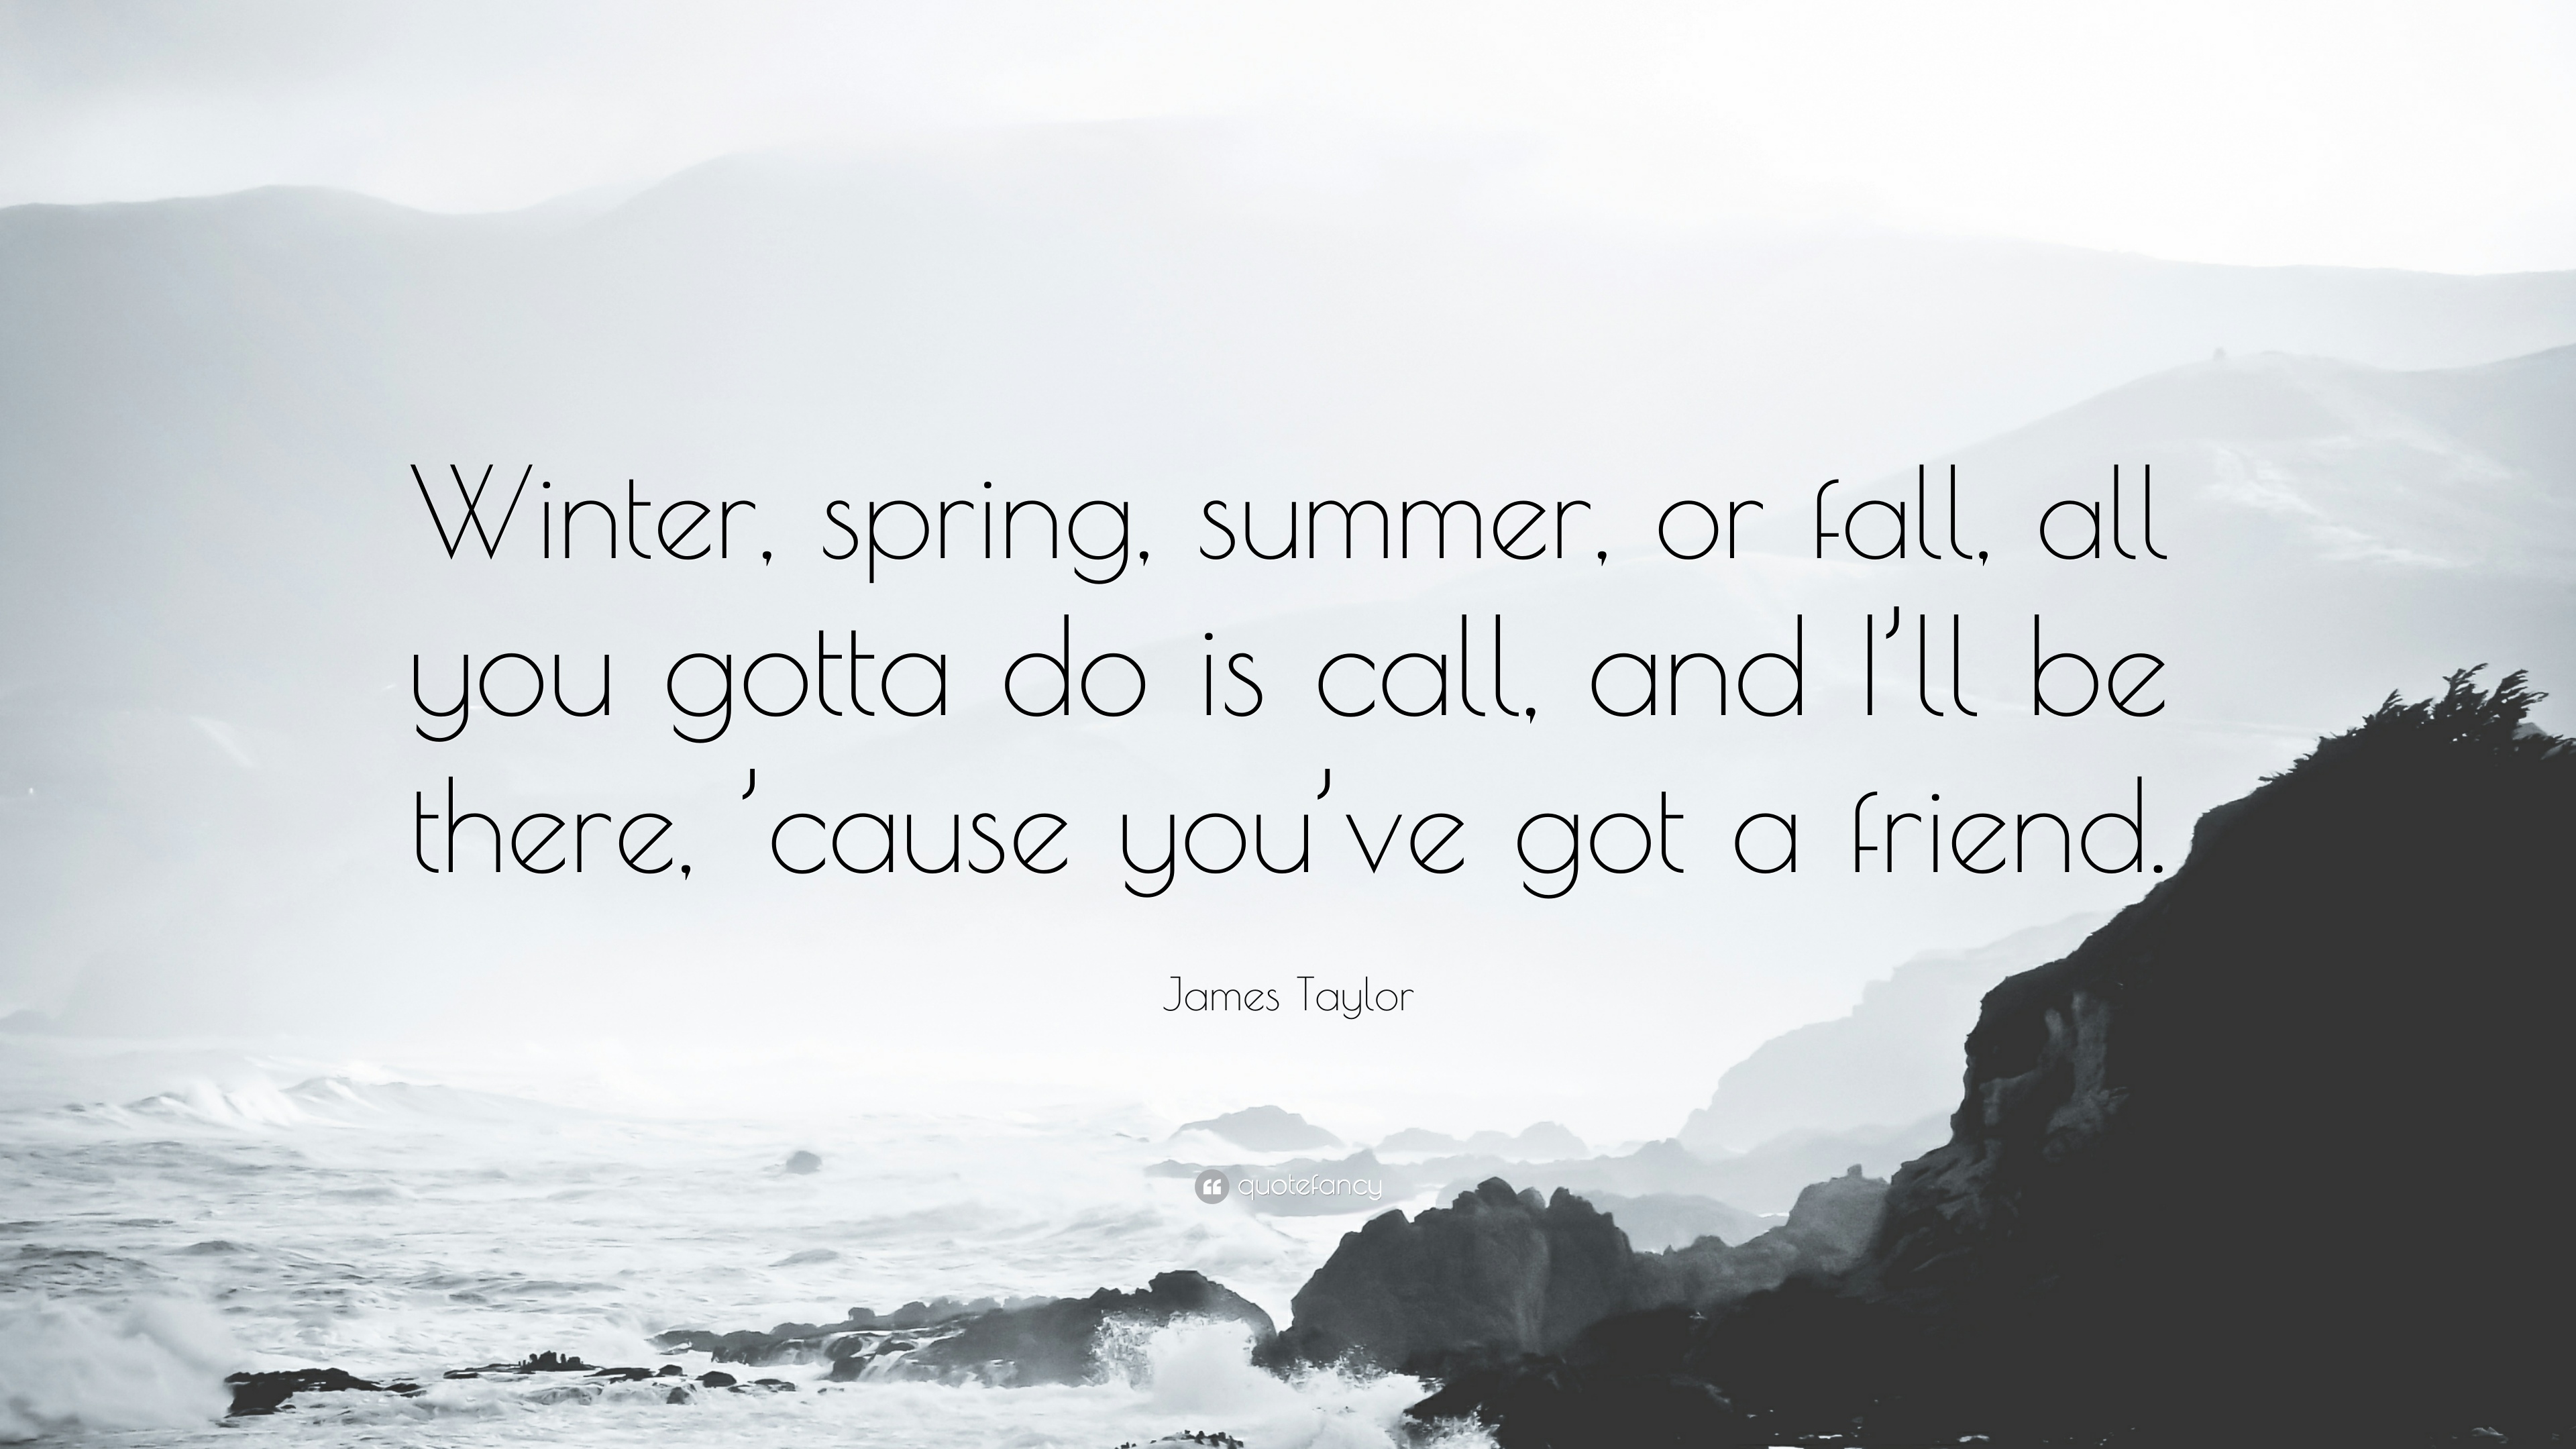 James Taylor Quote: “Winter, spring, summer, or fall, all you gotta do is call, and I'll be there, 'cause you've got a friend.” (7 wallpaper)